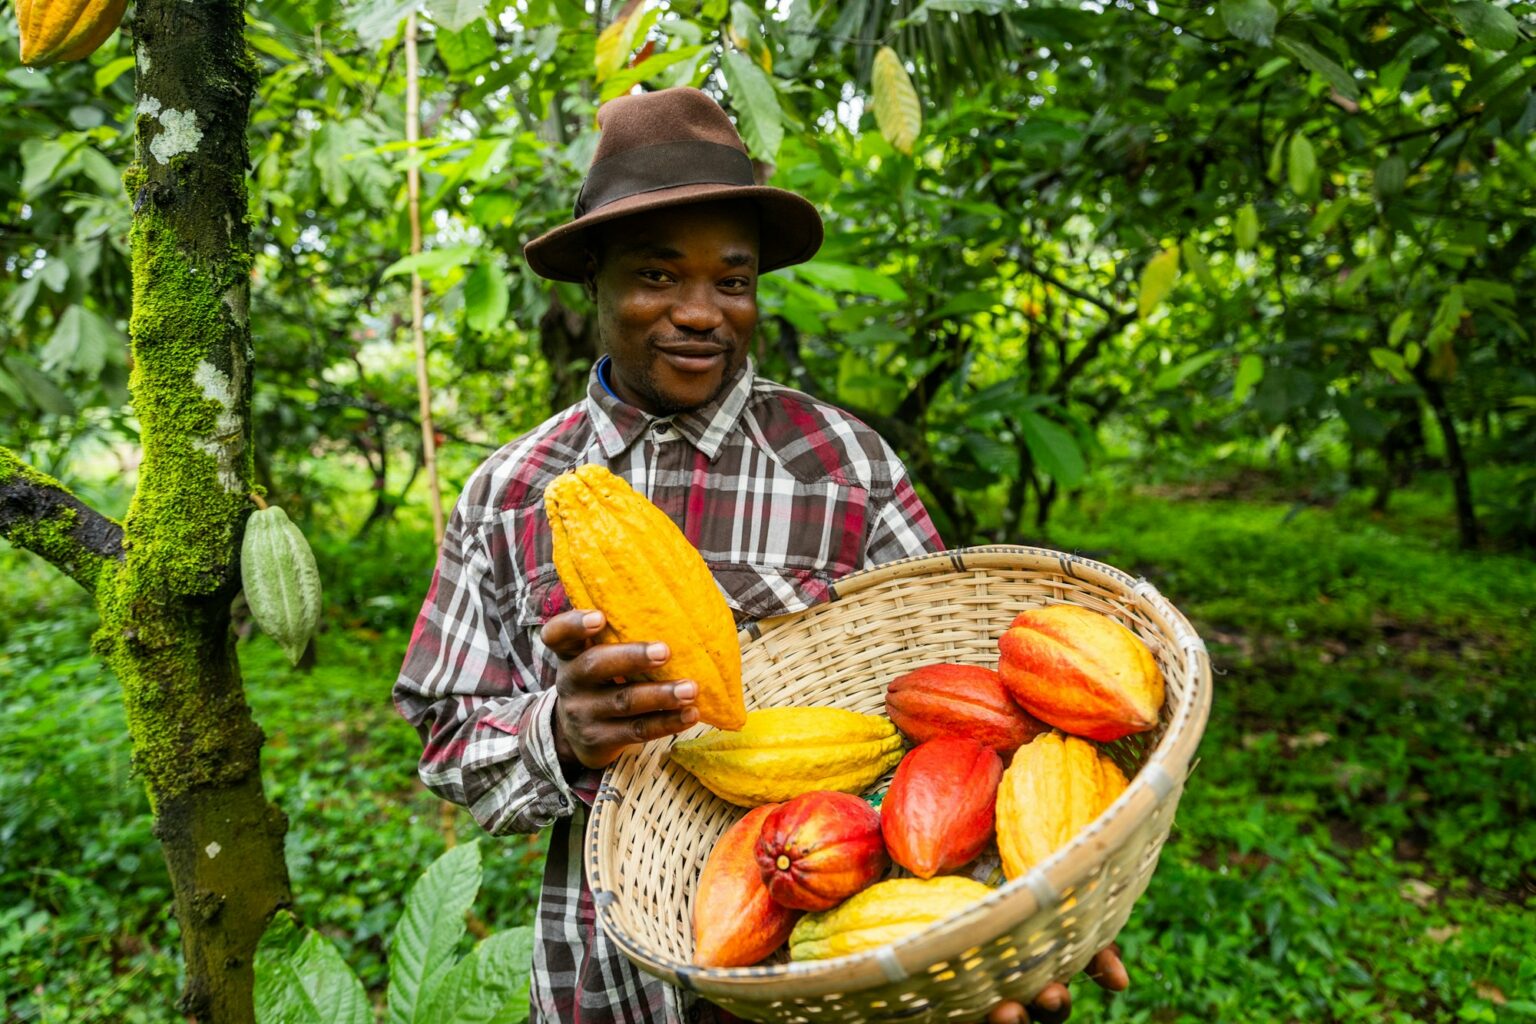 A smiling African farmer harvesting cocoa pods on the plantation, production of chocolate in Africa